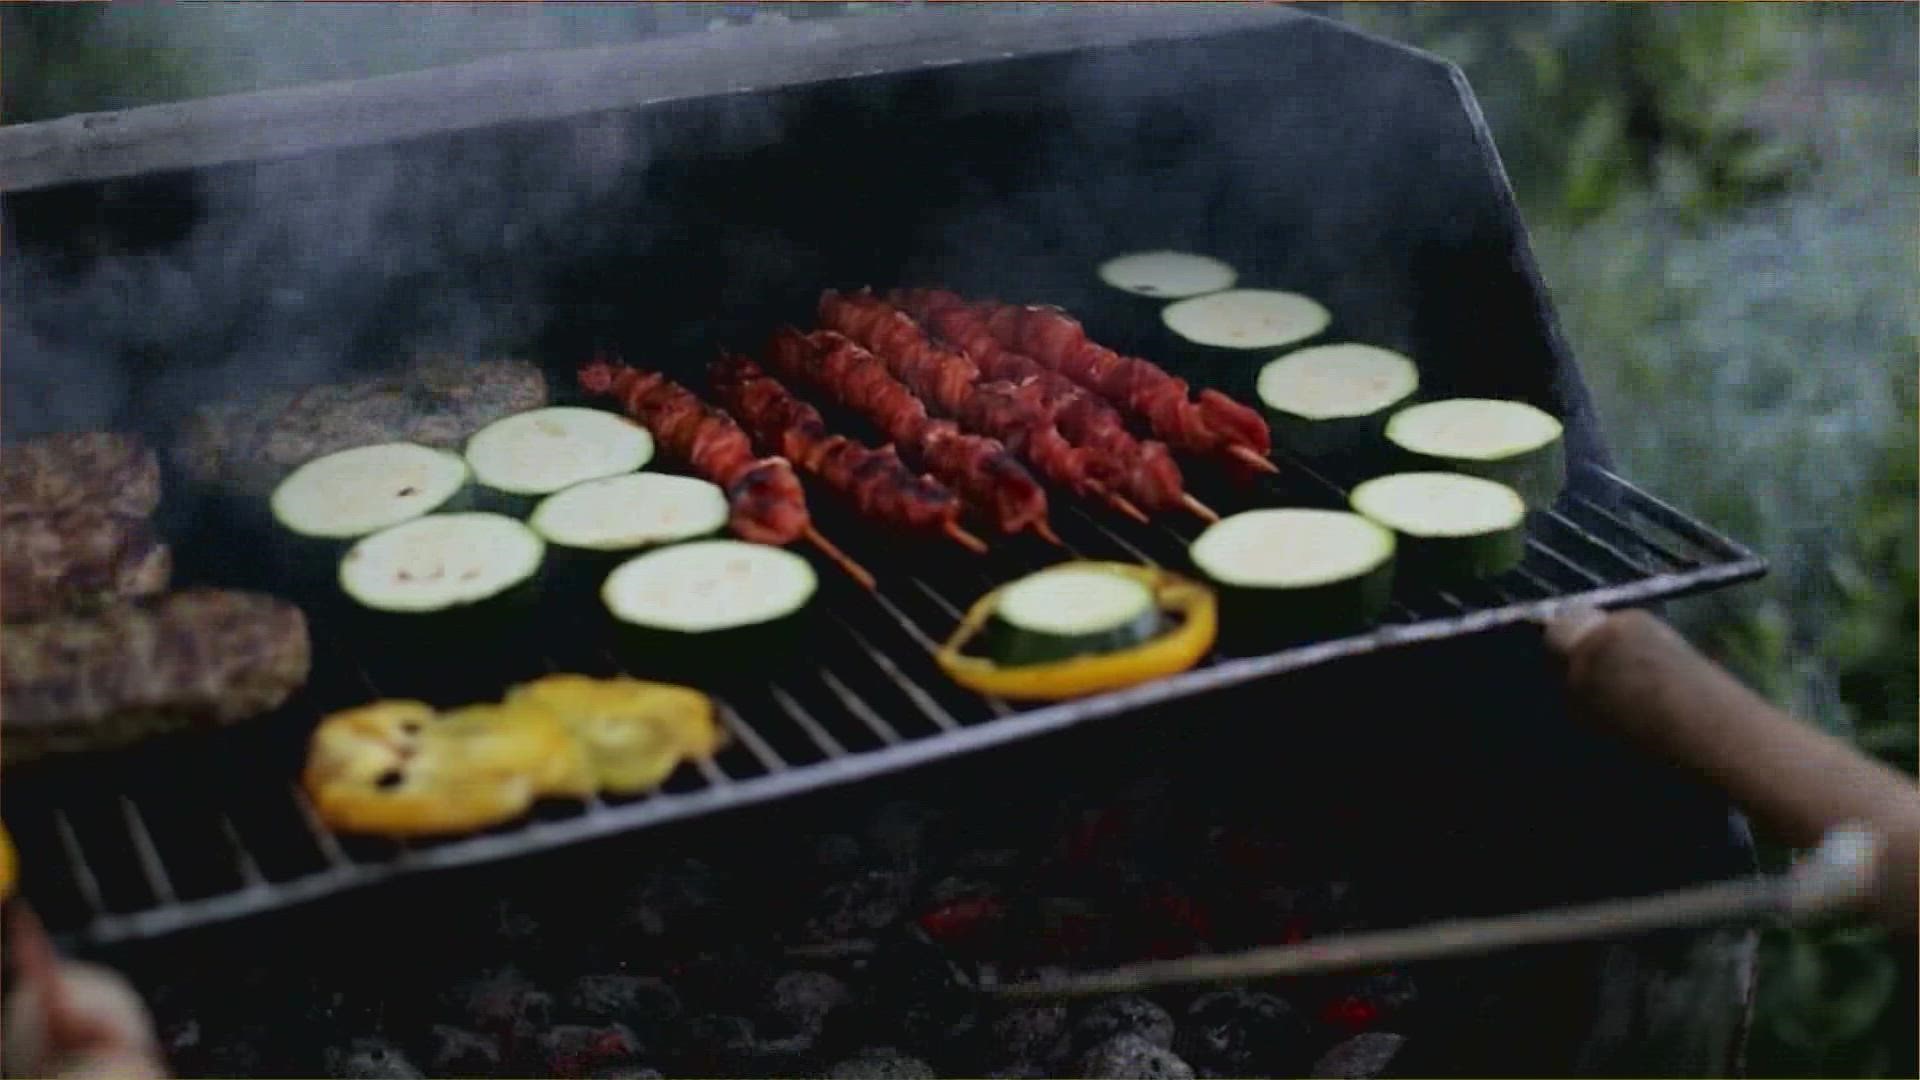 Many Texans will celebrate Labor Day by throwing some food on the grill. As you're celebrating, make sure you're putting safety first.